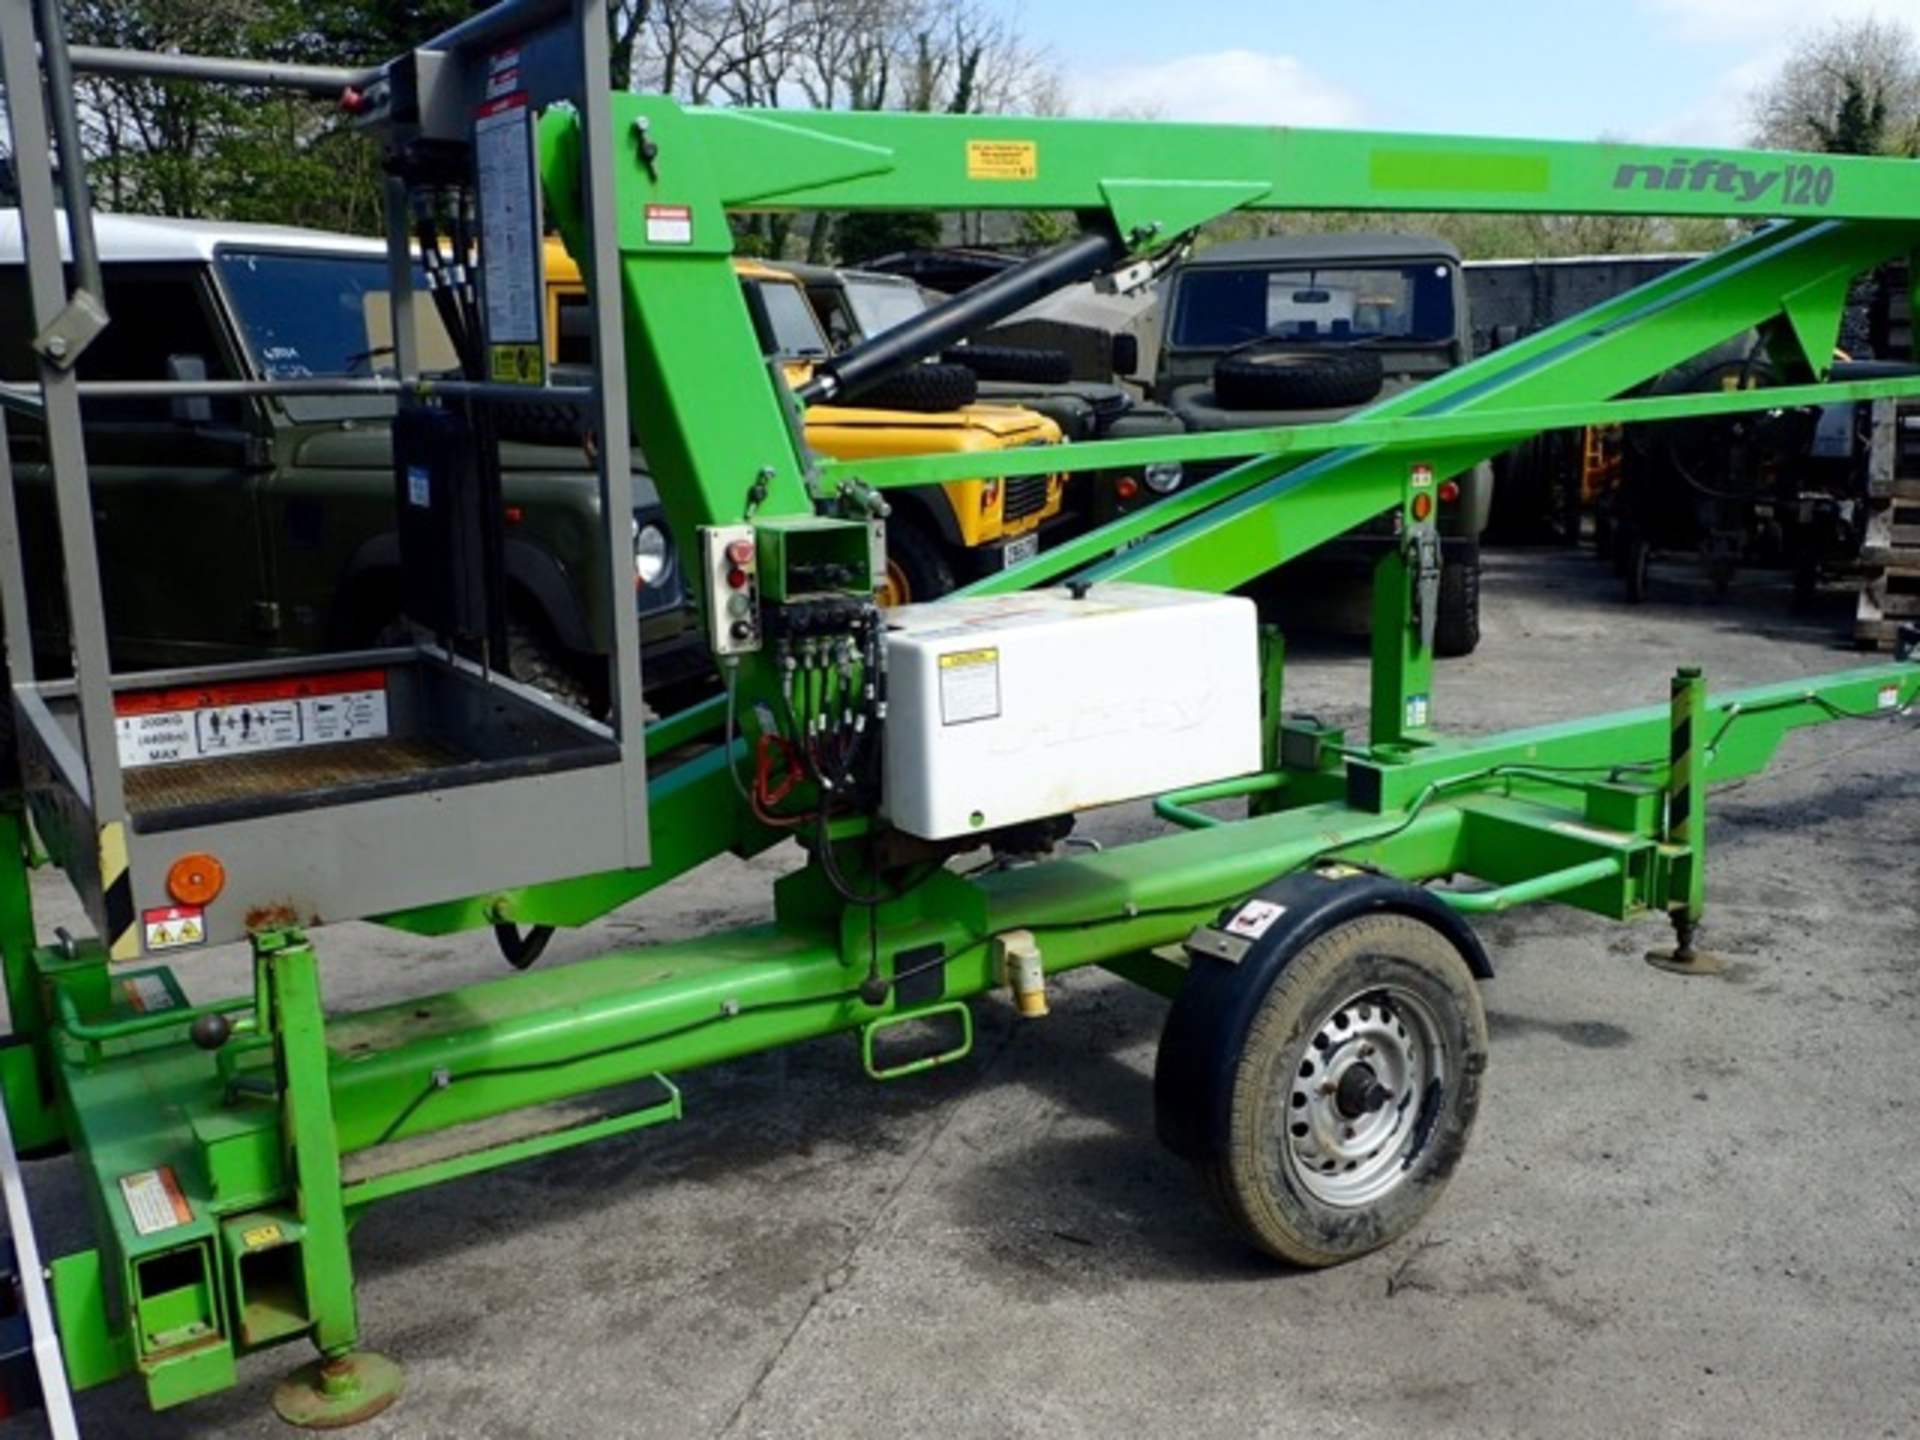 Nifty 120 12 metre towable electric boom lift access platform Year: 2012 S/N: 0121292 - Image 3 of 9